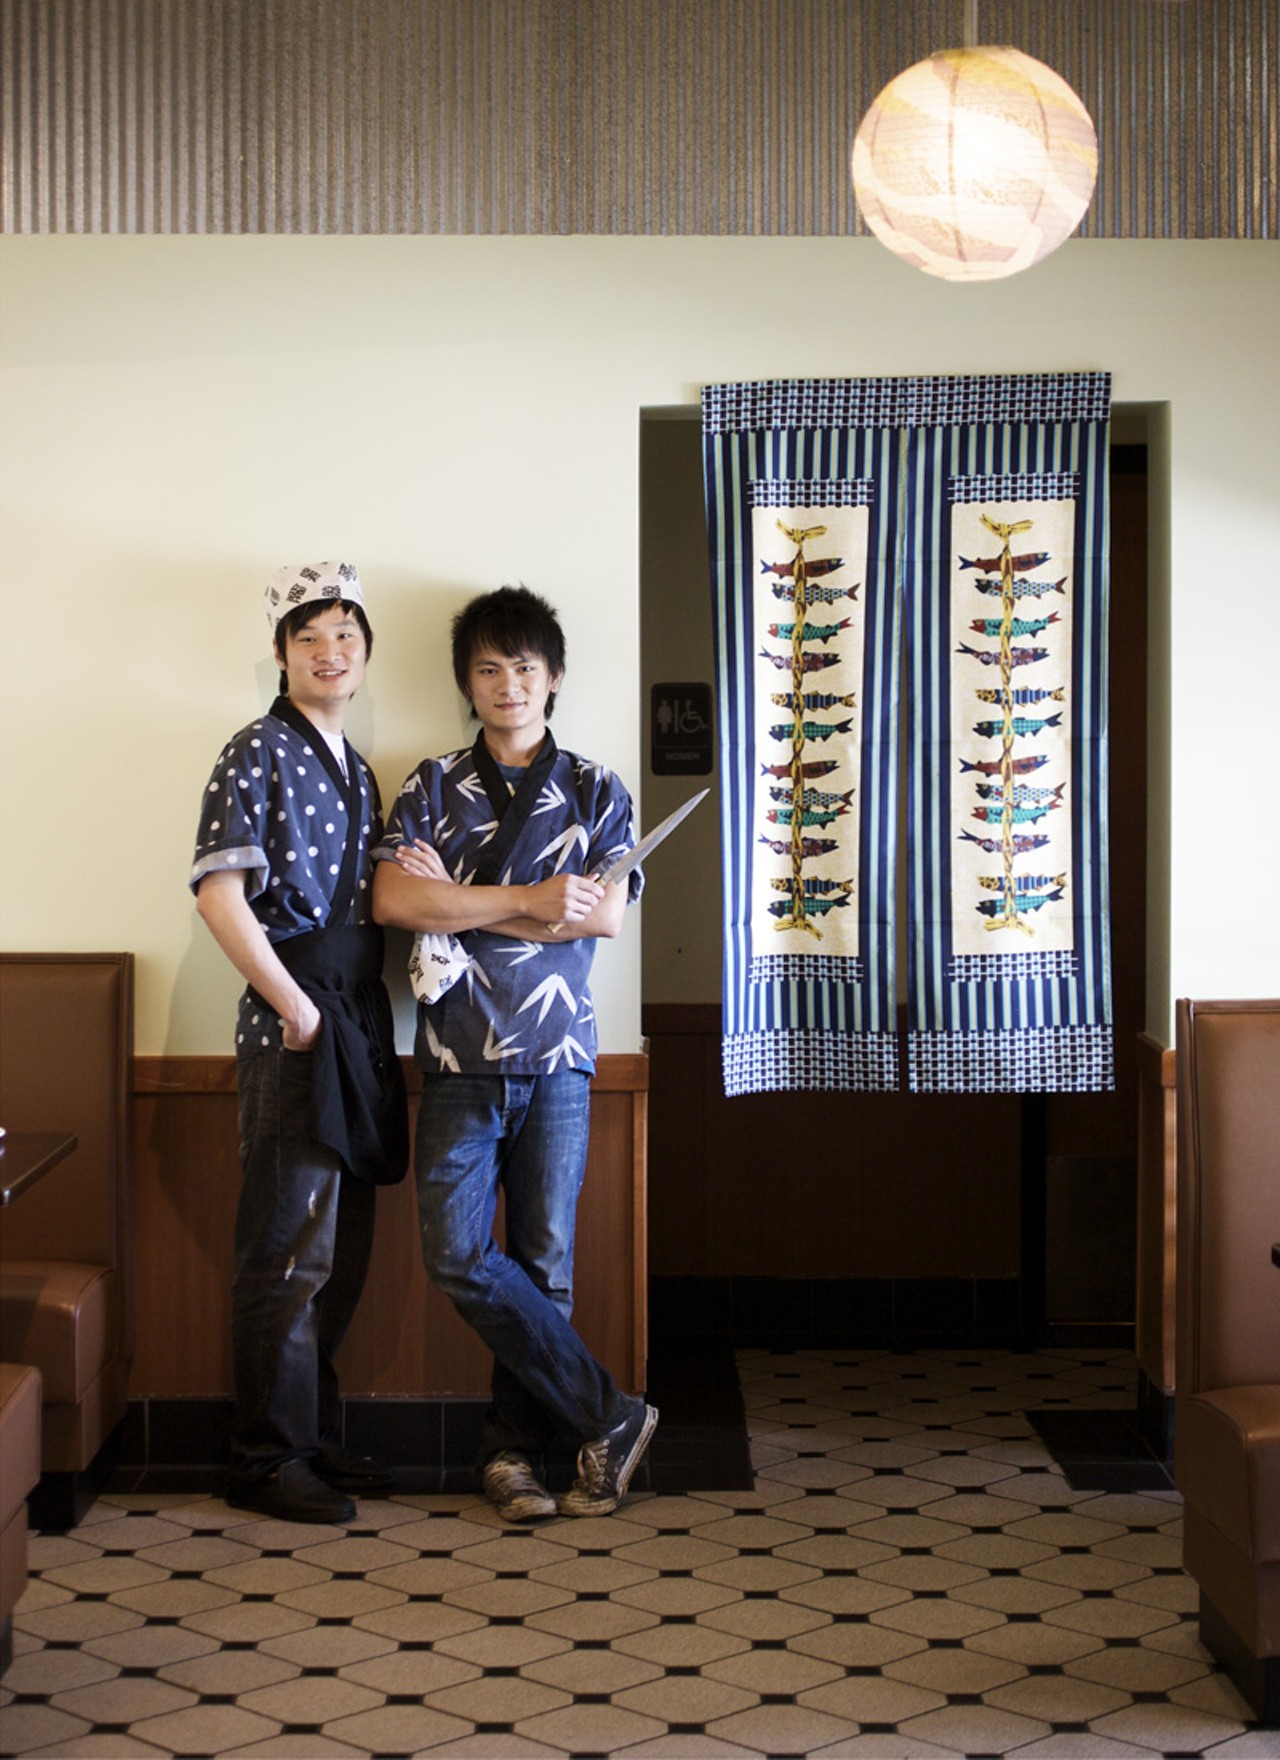 On left is sushi chef Qi Dong, on right is his cousin and one of the owners of Sushi Ai, Jake Dong.